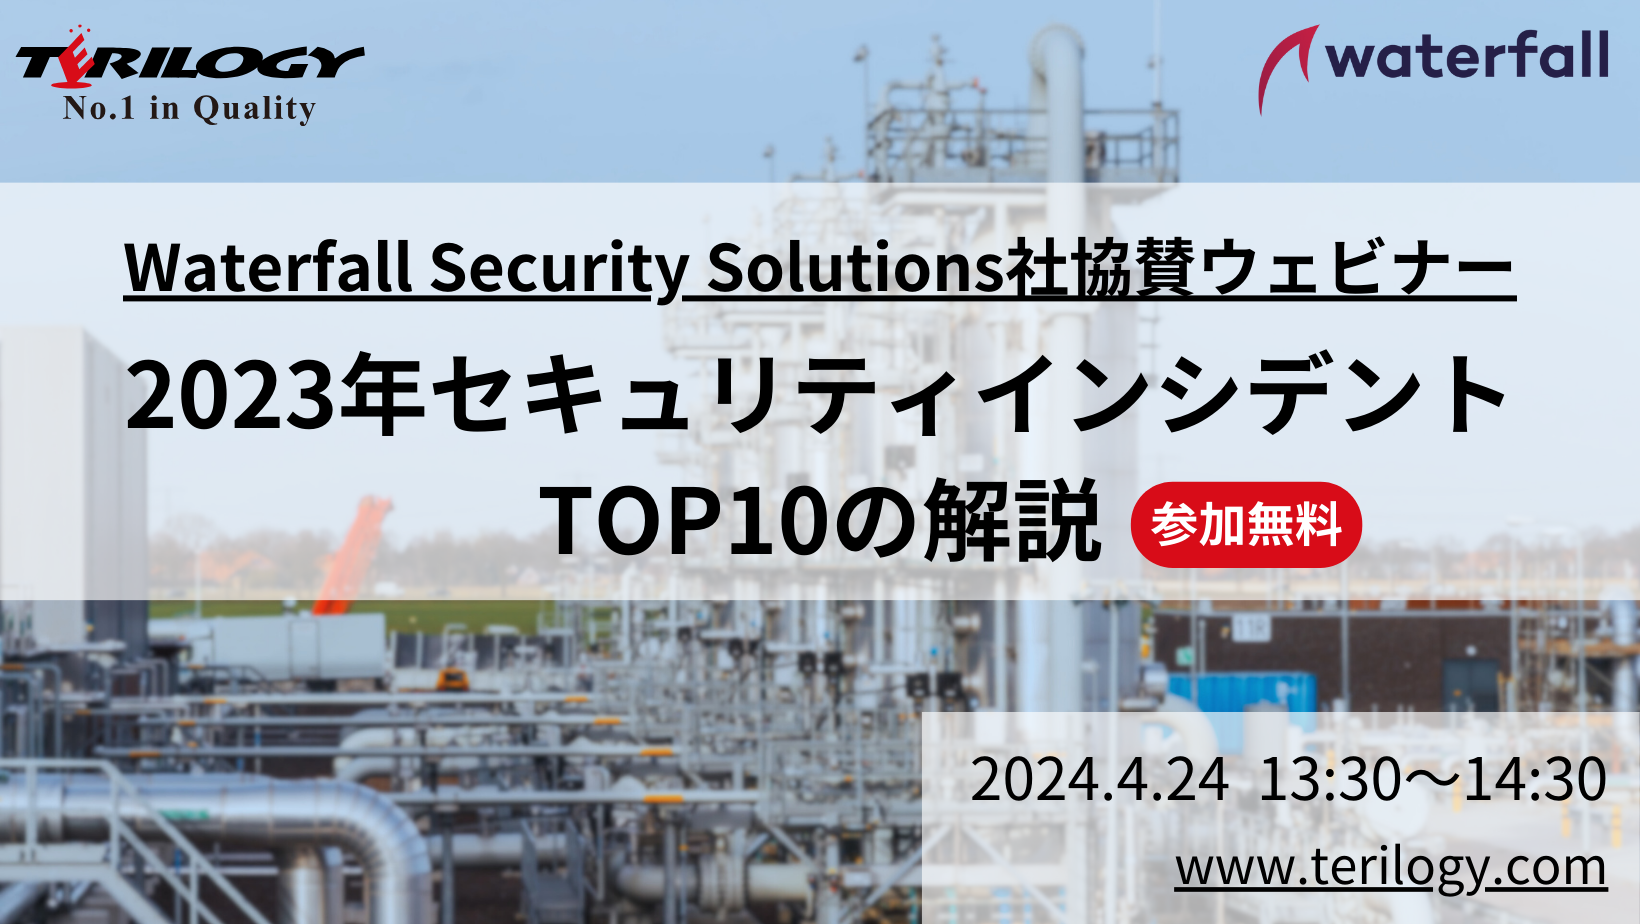 Waterfall Security Solutions社協賛ウェビナー：2023年セキュリティインシデントTOP10の解説